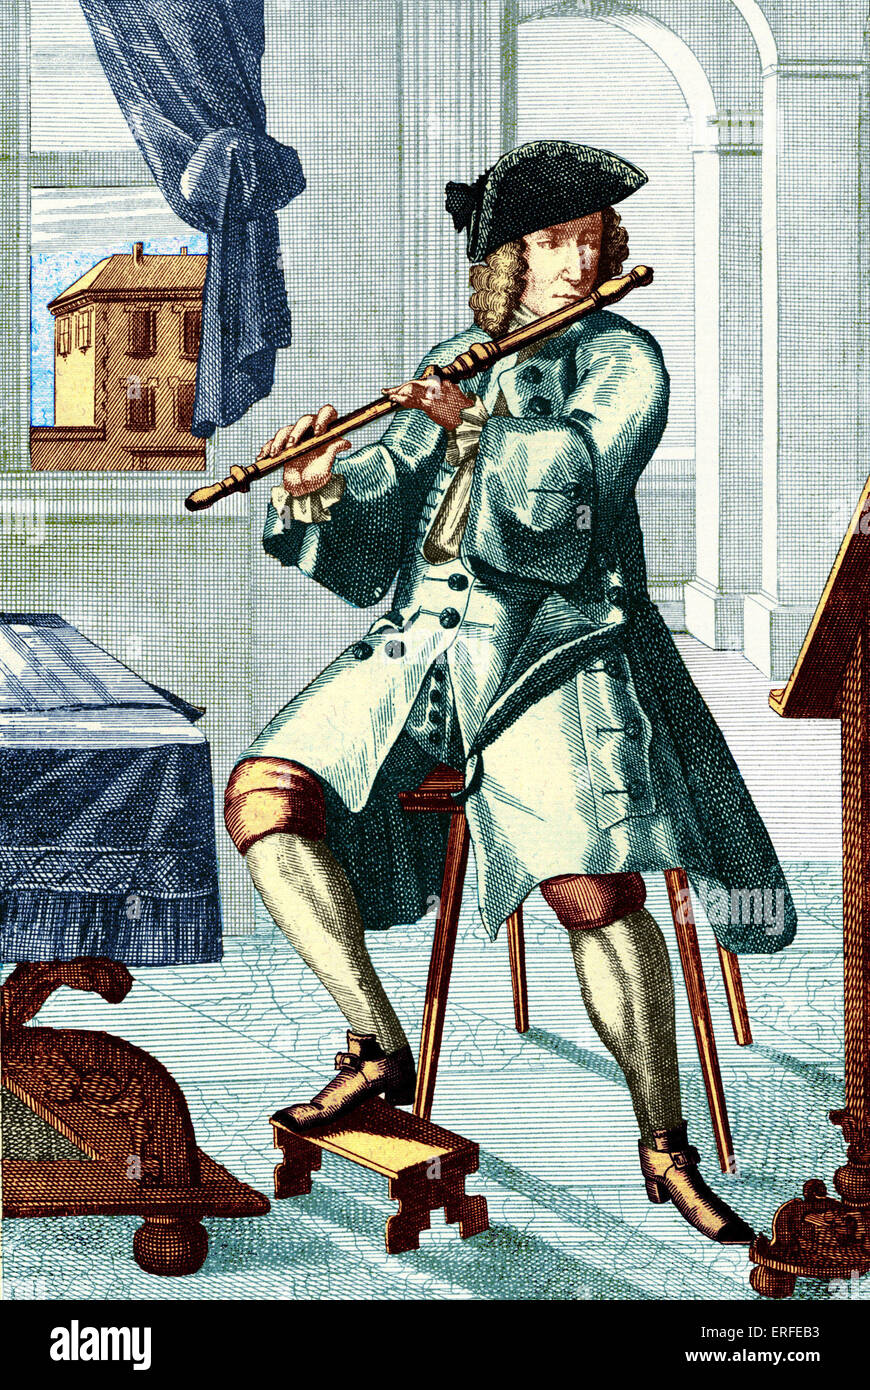 Man playing the transverse flute (travers-flaute). Engraving by J.C. Weigel (1661-1726) from 'Musikalisches Theatrum'. COLOURED VERSION. Stock Photo